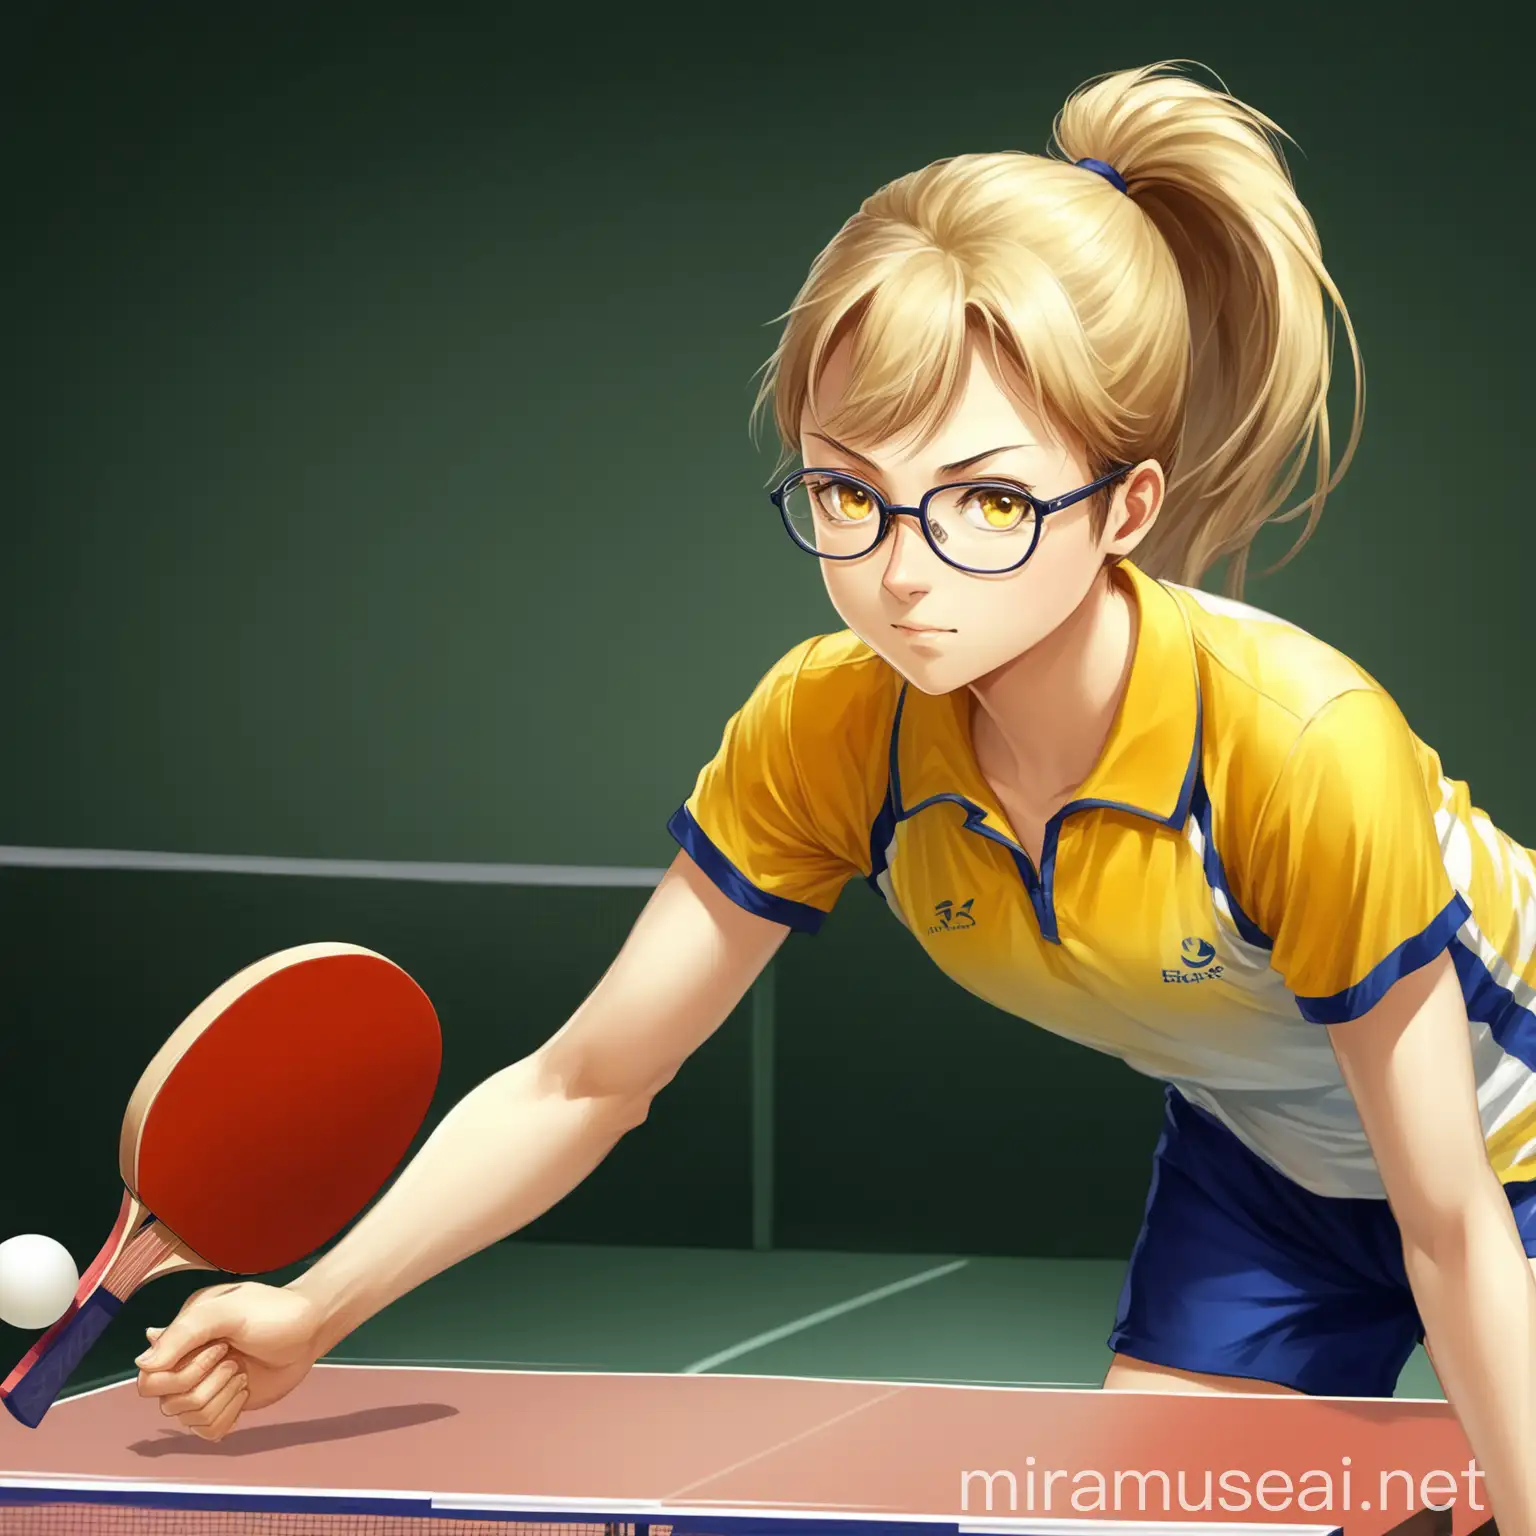 Energetic Table Tennis Player in Action